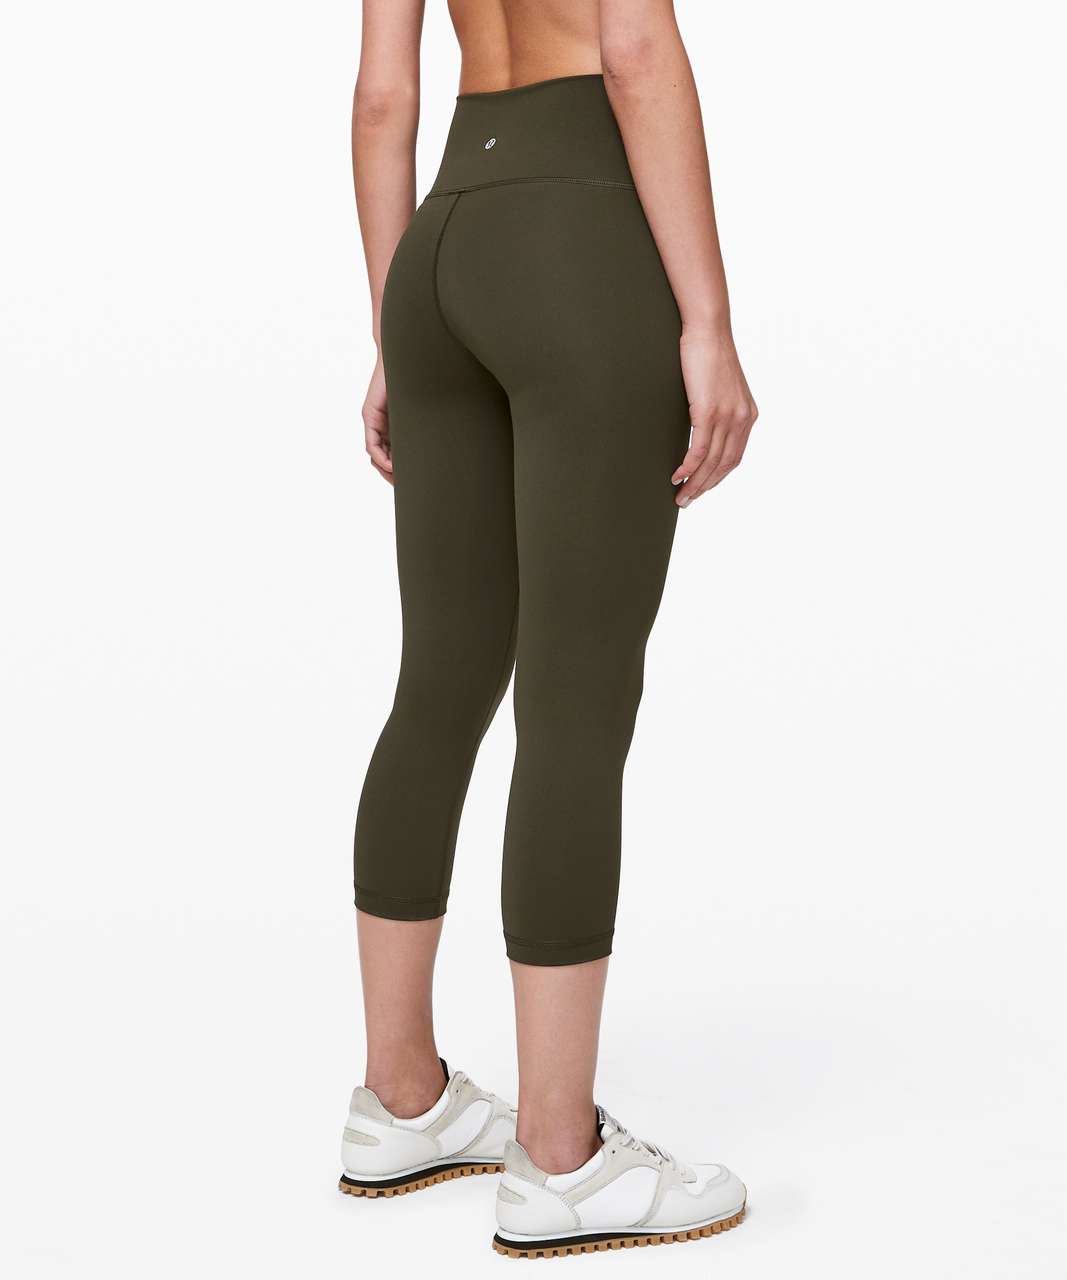 Best Lululemon High-rise Luxtreme wunder Under for sale in Vancouver,  British Columbia for 2024